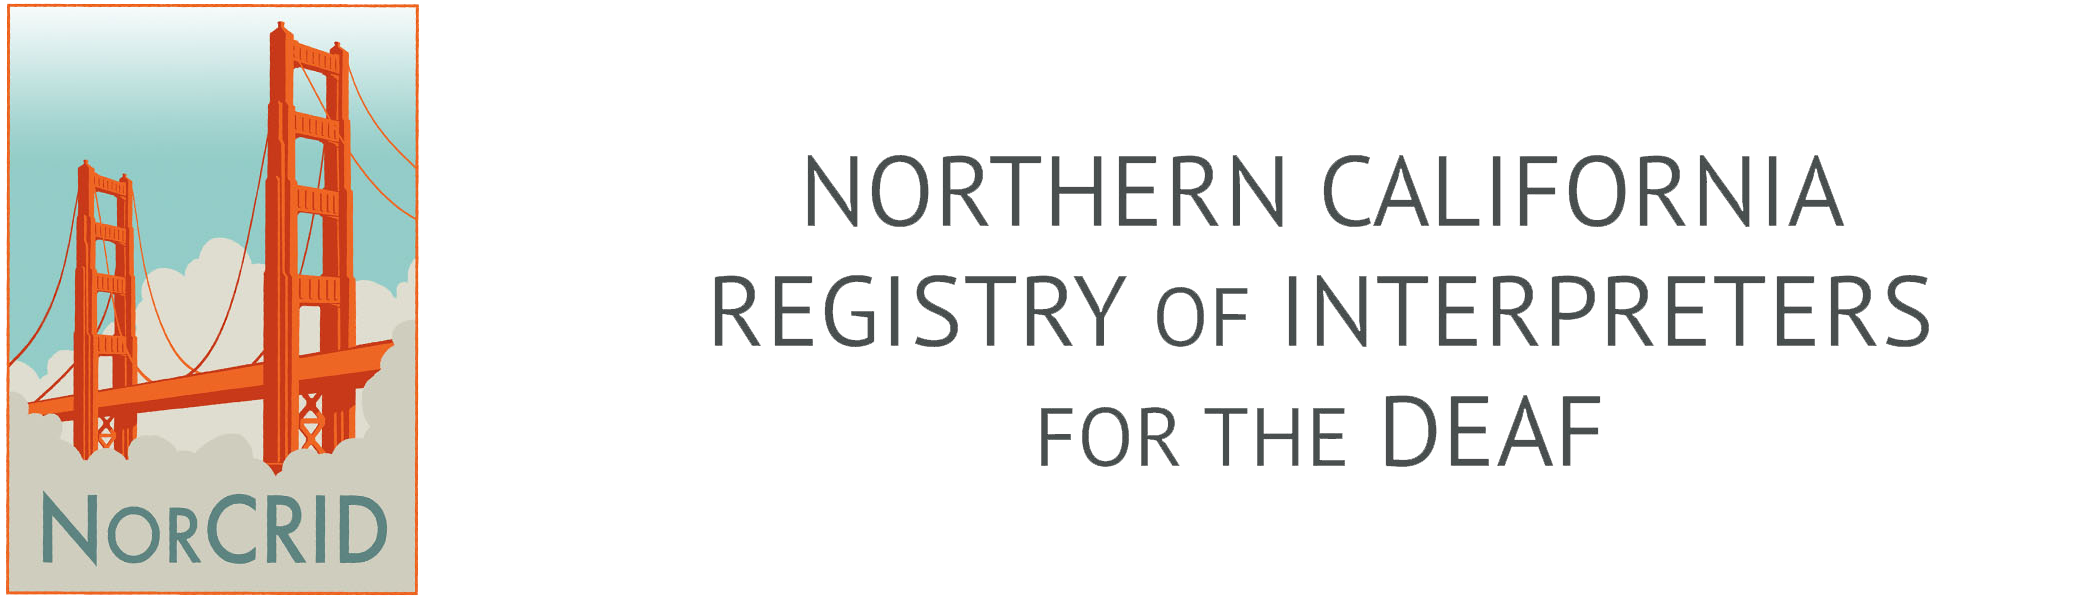 NorCRID logo (image of the Golden Gate Bridge with turquoise sky above the peaks and clouds below, the text NorCRID is at the bottom of the logo) and banner reading Northern California Registry of Interpreters for the Deaf